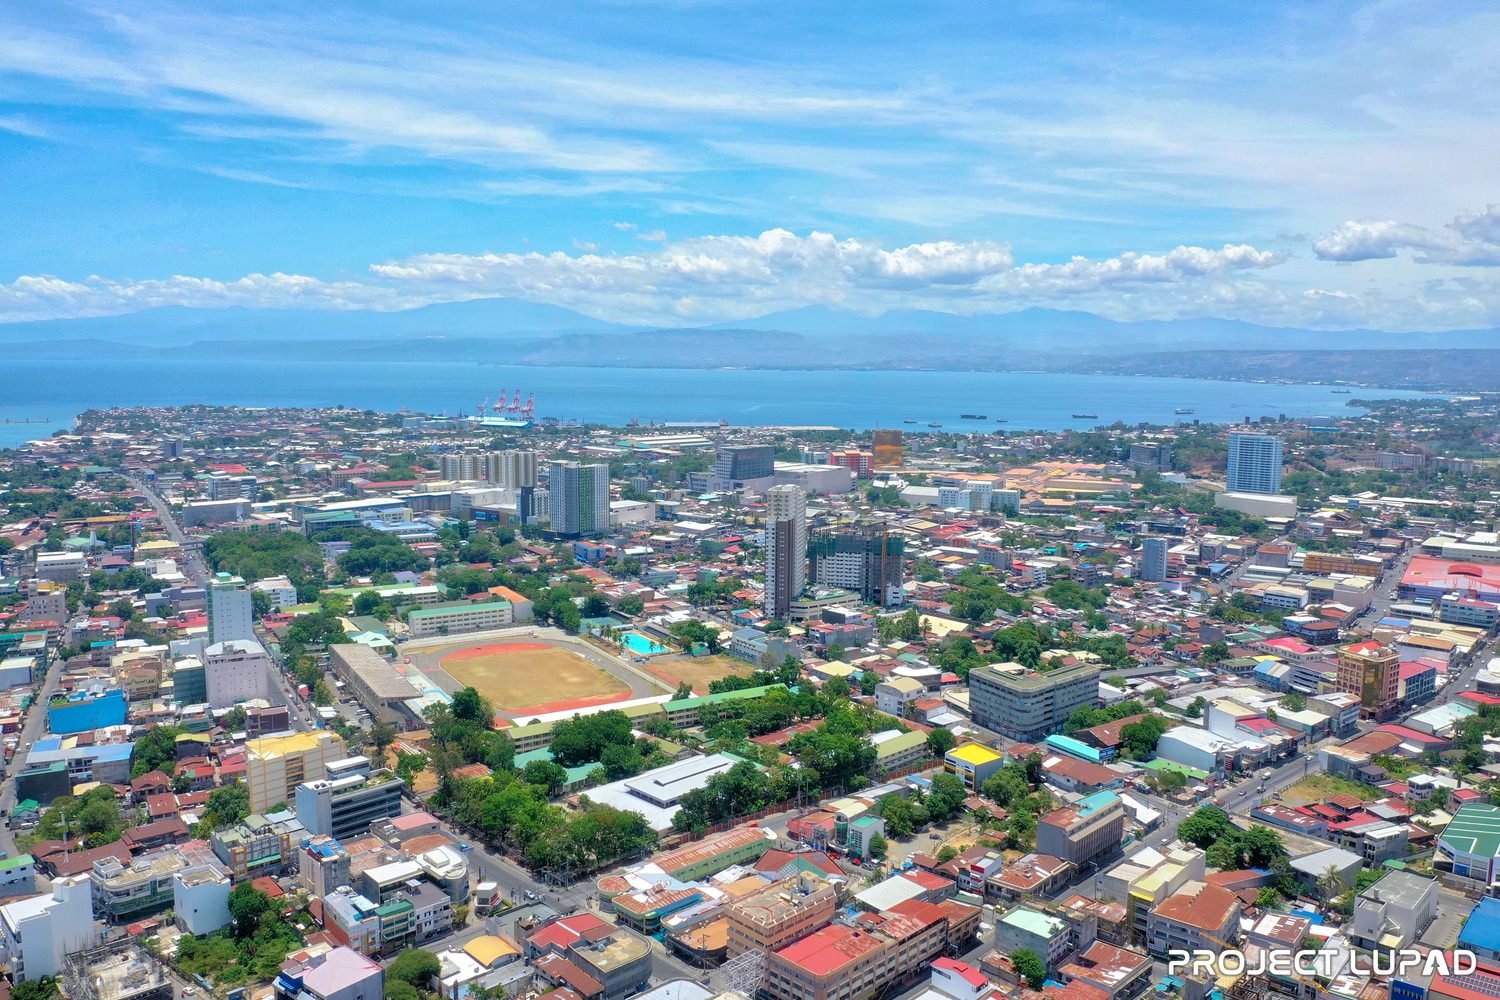 Aerial View Of Cagayan De Oro Visit Philippines Aerial Photography | My ...